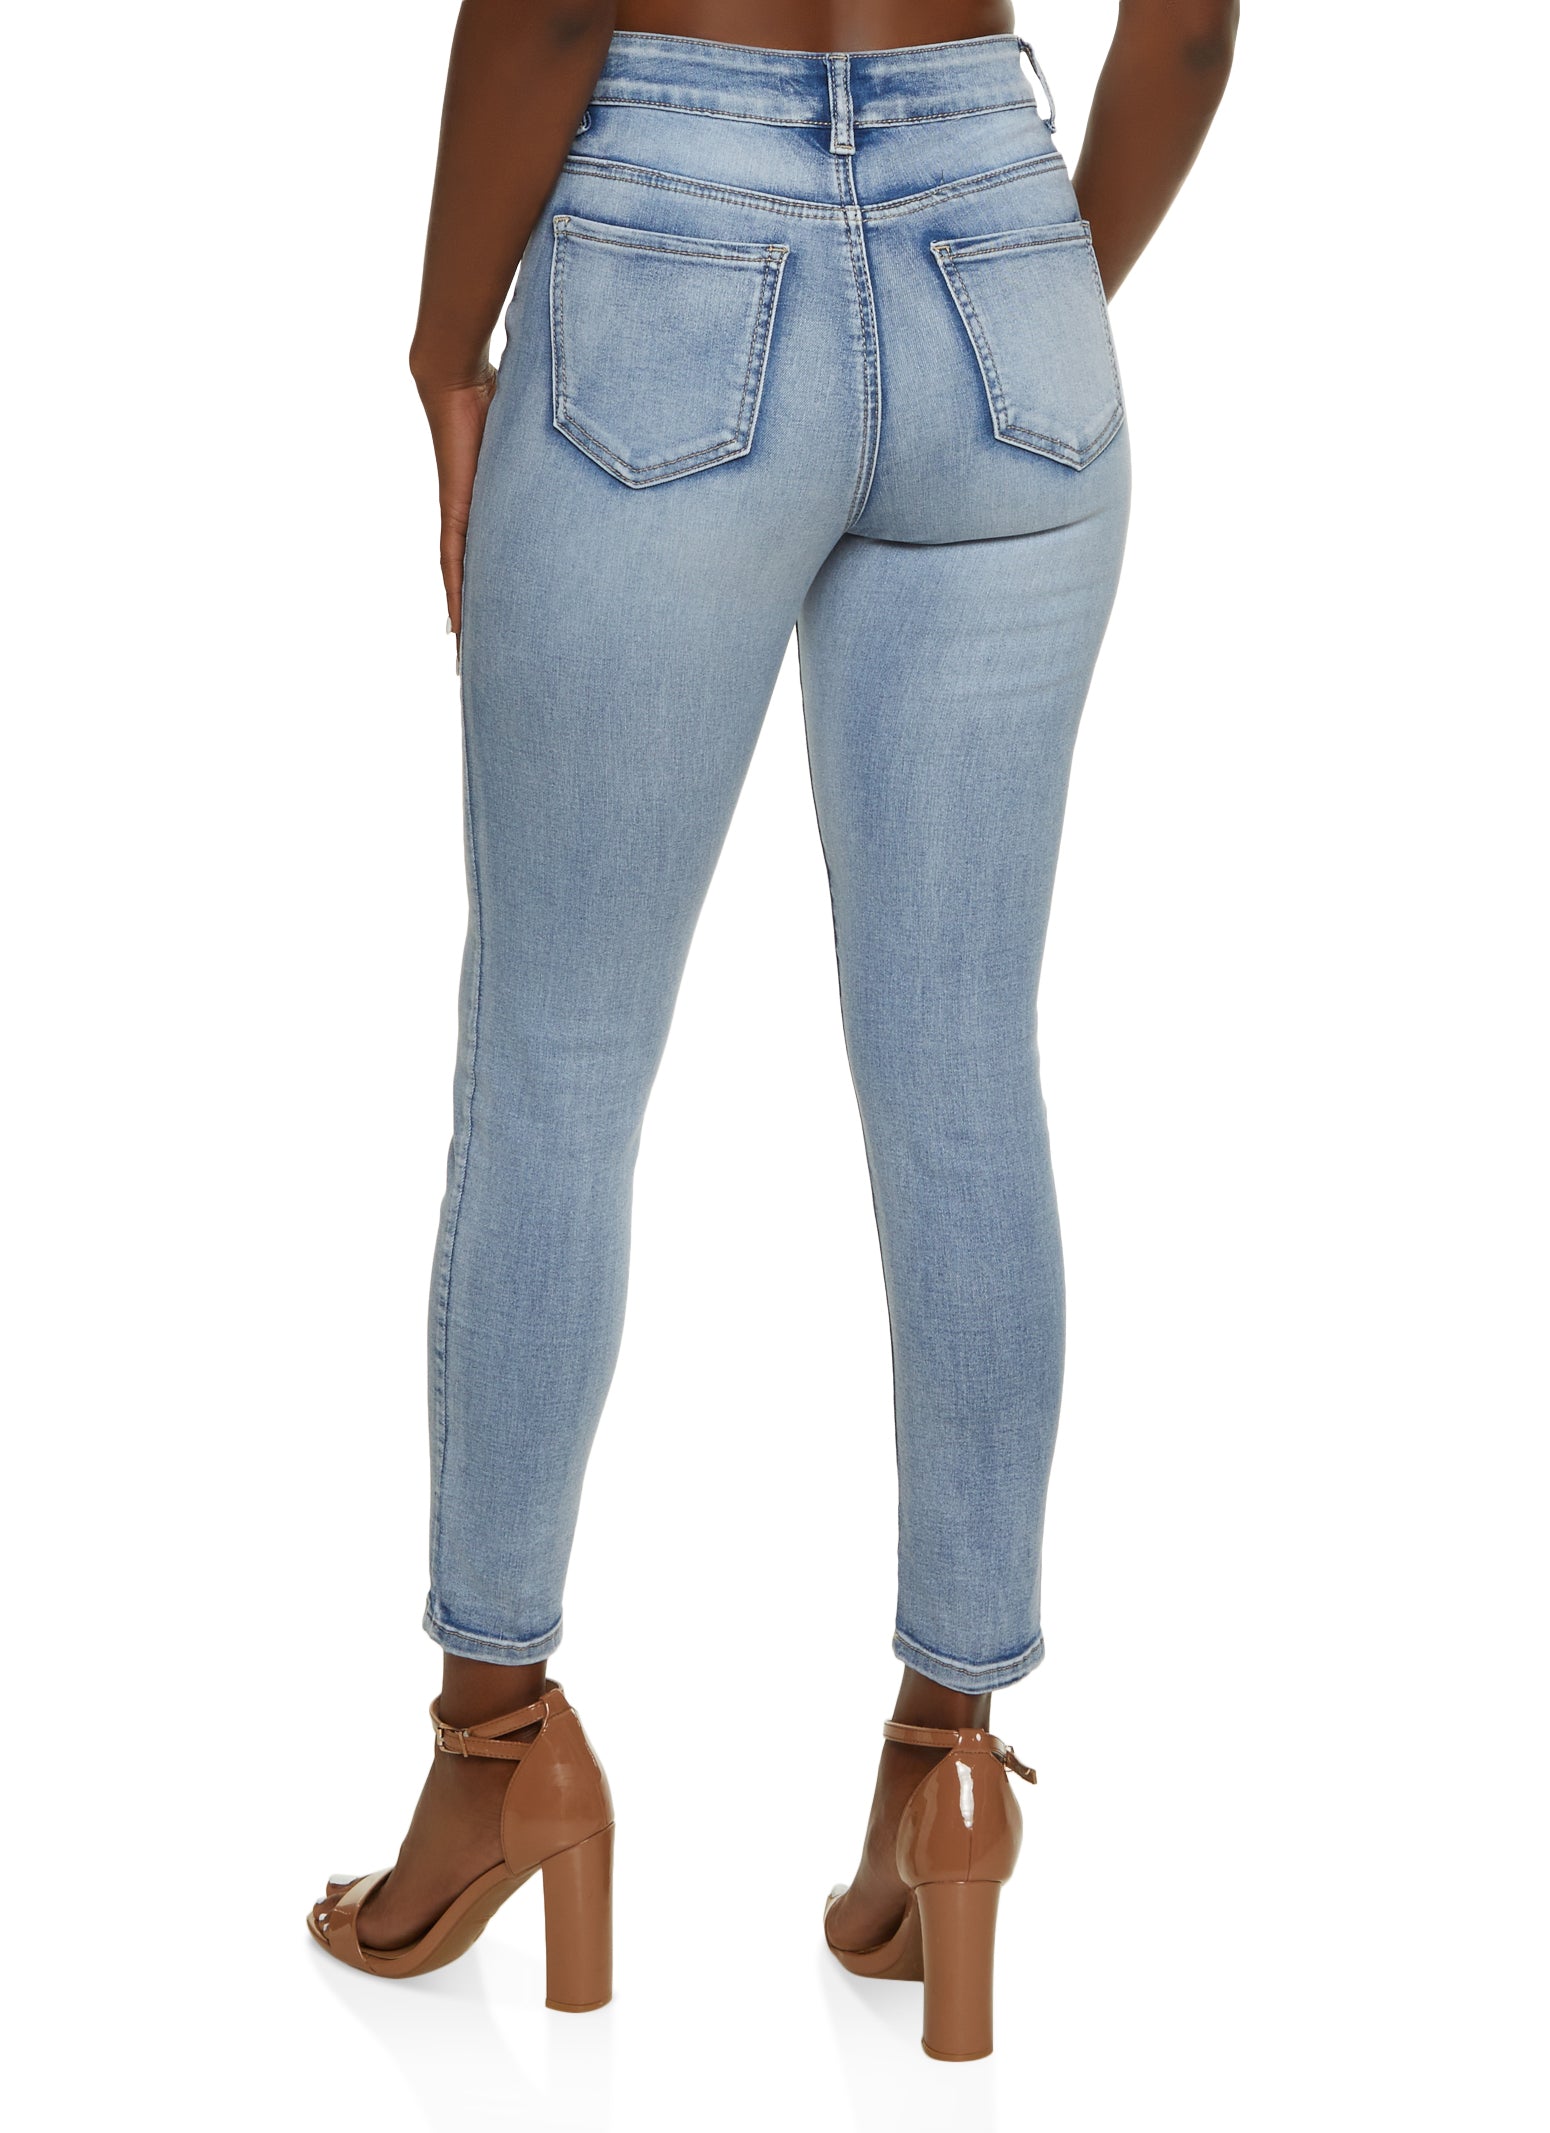 WAX Whiskered Ankle Skinny Jeans